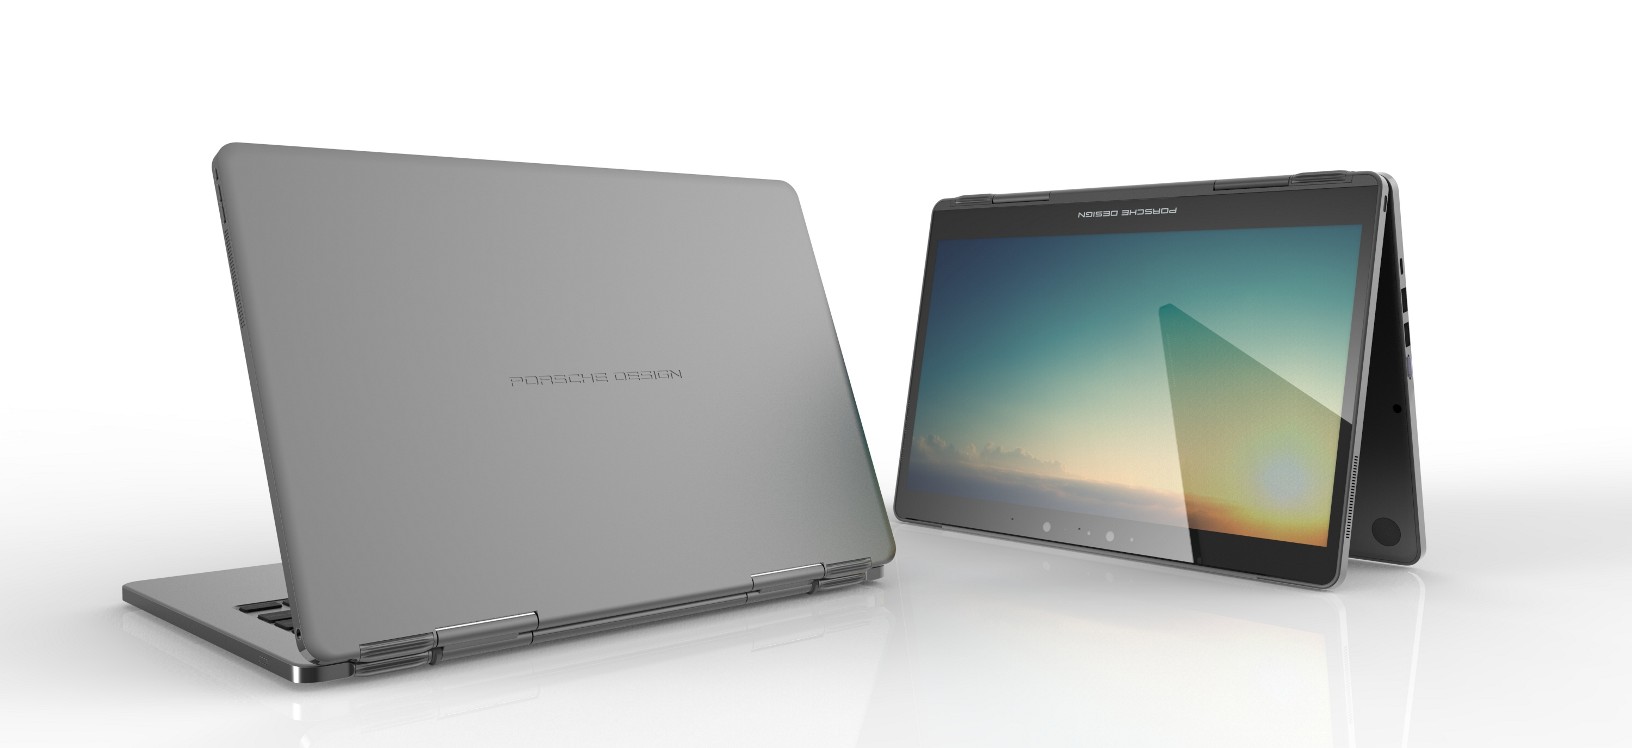 A 2-in-1 device from Porsche Design and Trekstor